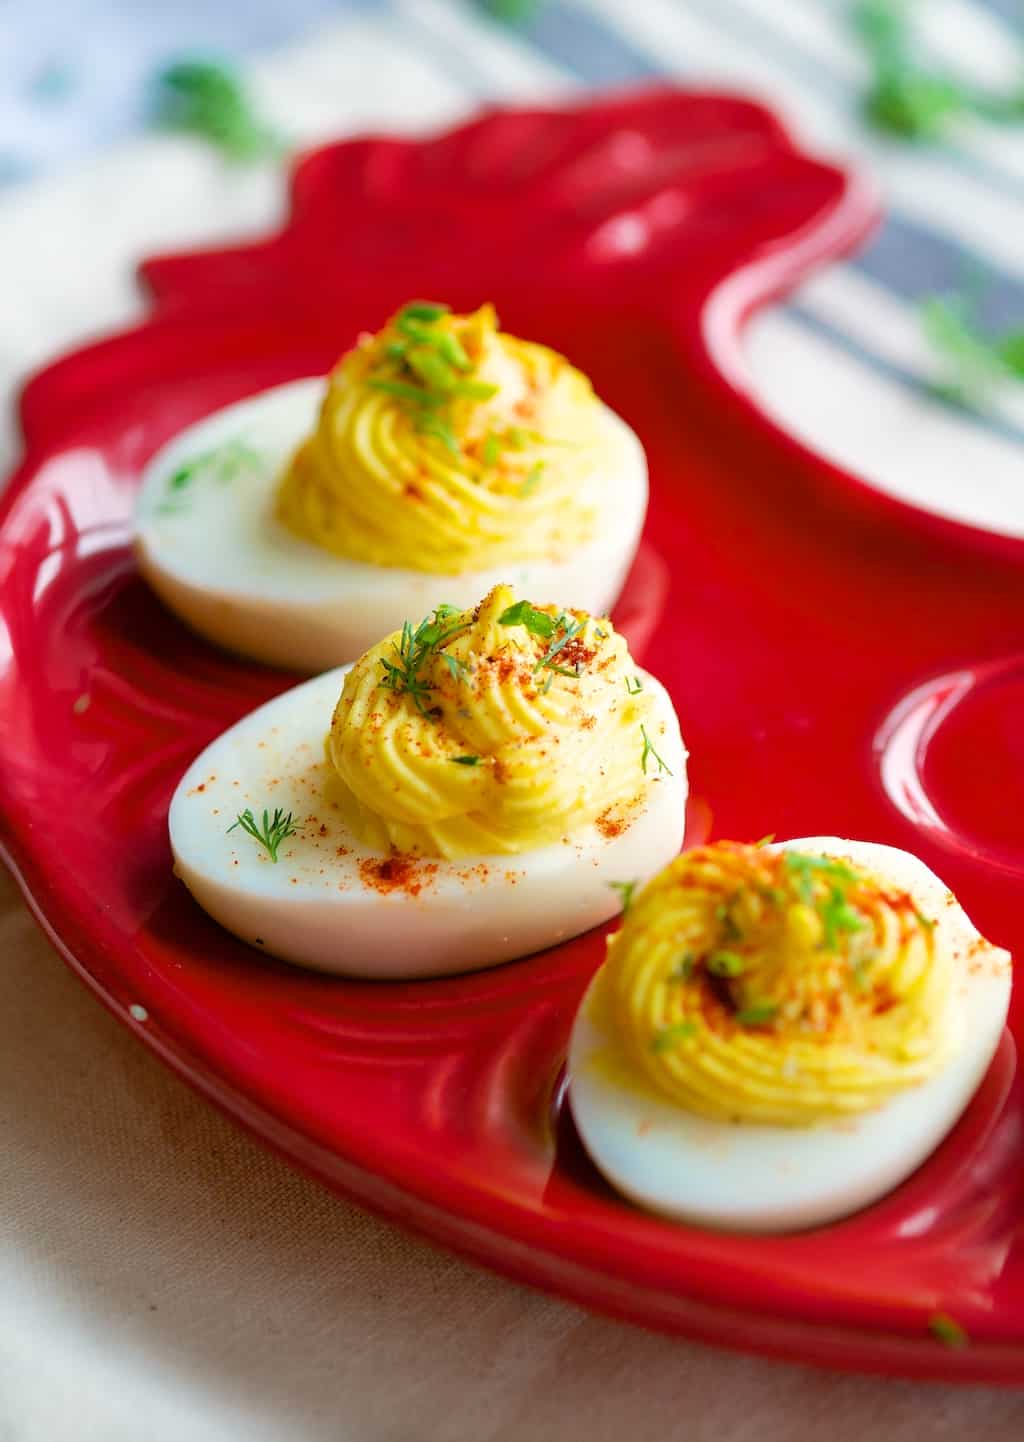 How to Make Perfect Deviled Eggs - Aberdeen's Kitchen